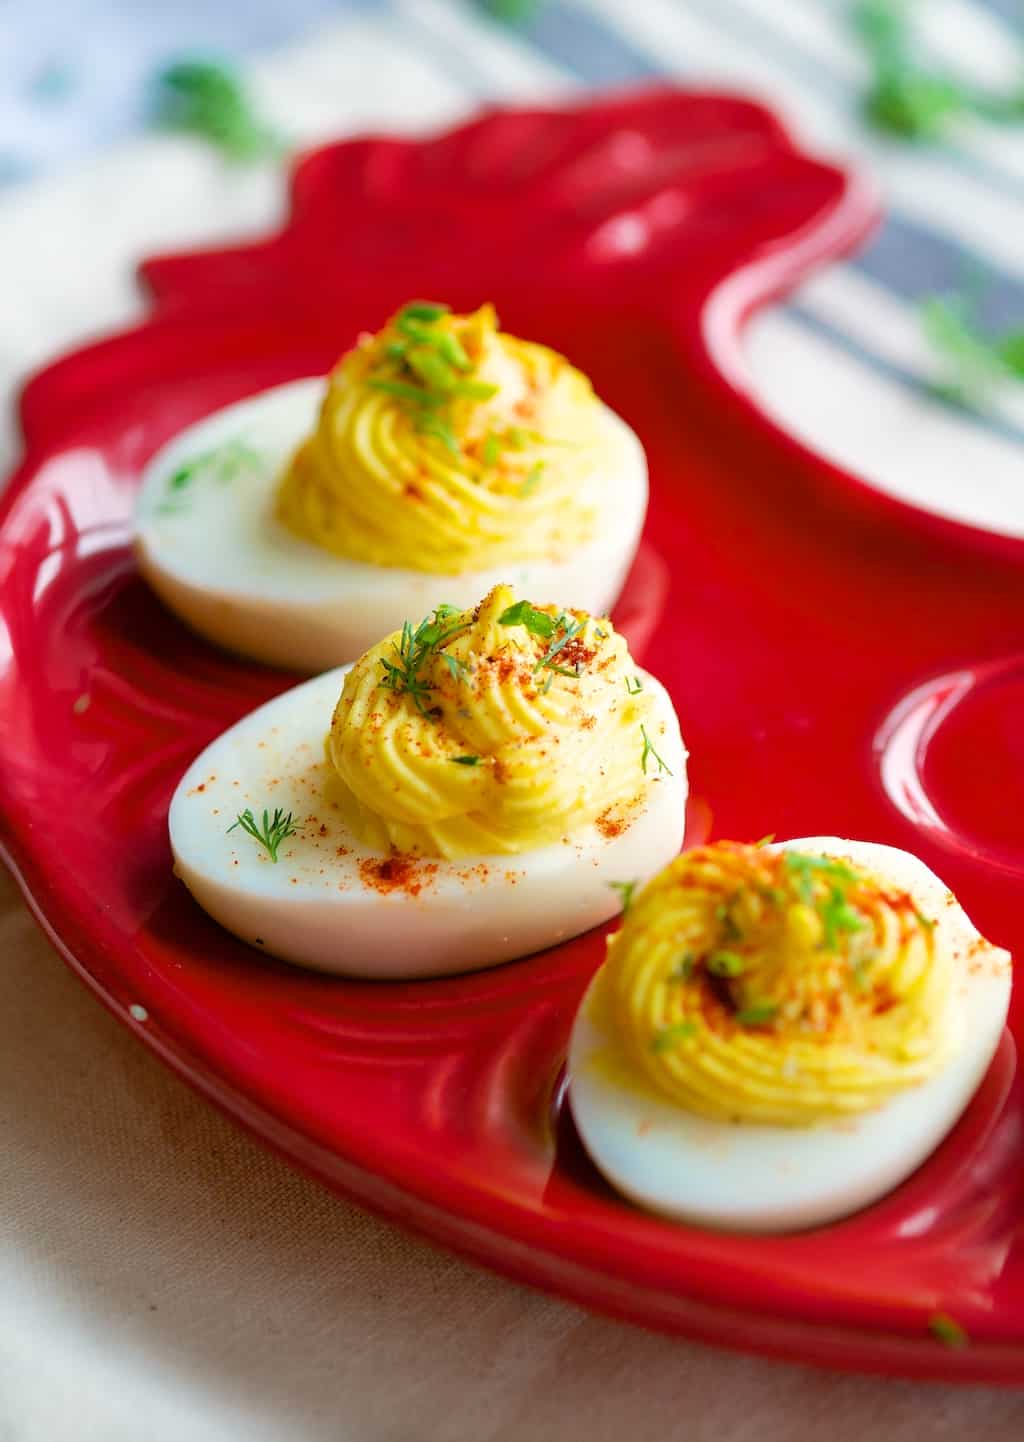 How to Make Perfect Deviled Eggs - Aberdeen's Kitchen